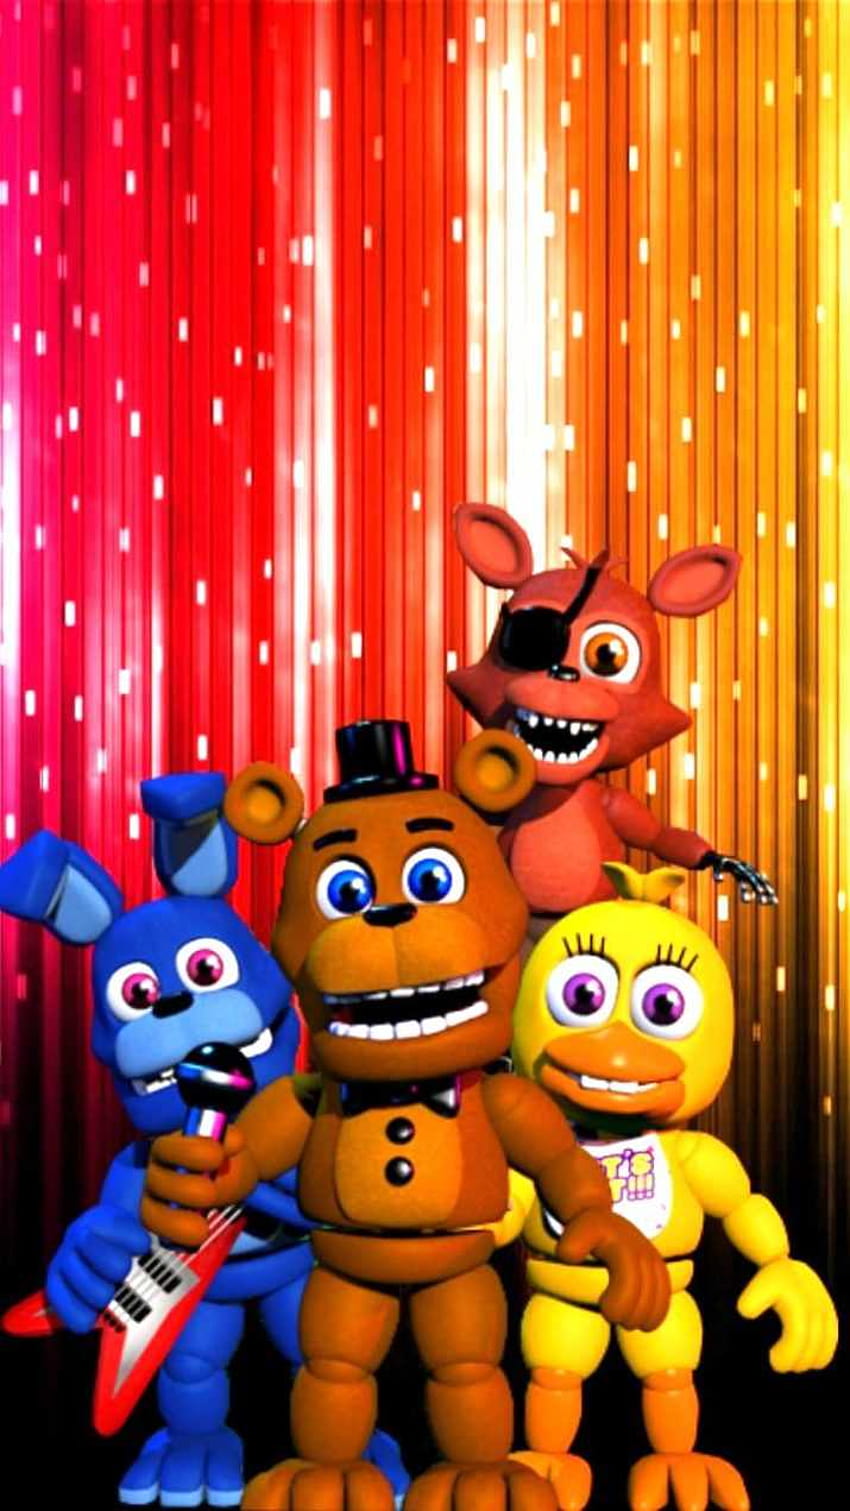 Wallpaper ID 447715  Video Game Five Nights at Freddys 3 Phone Wallpaper  Springtrap Five Nights At Freddys 720x1280 free download